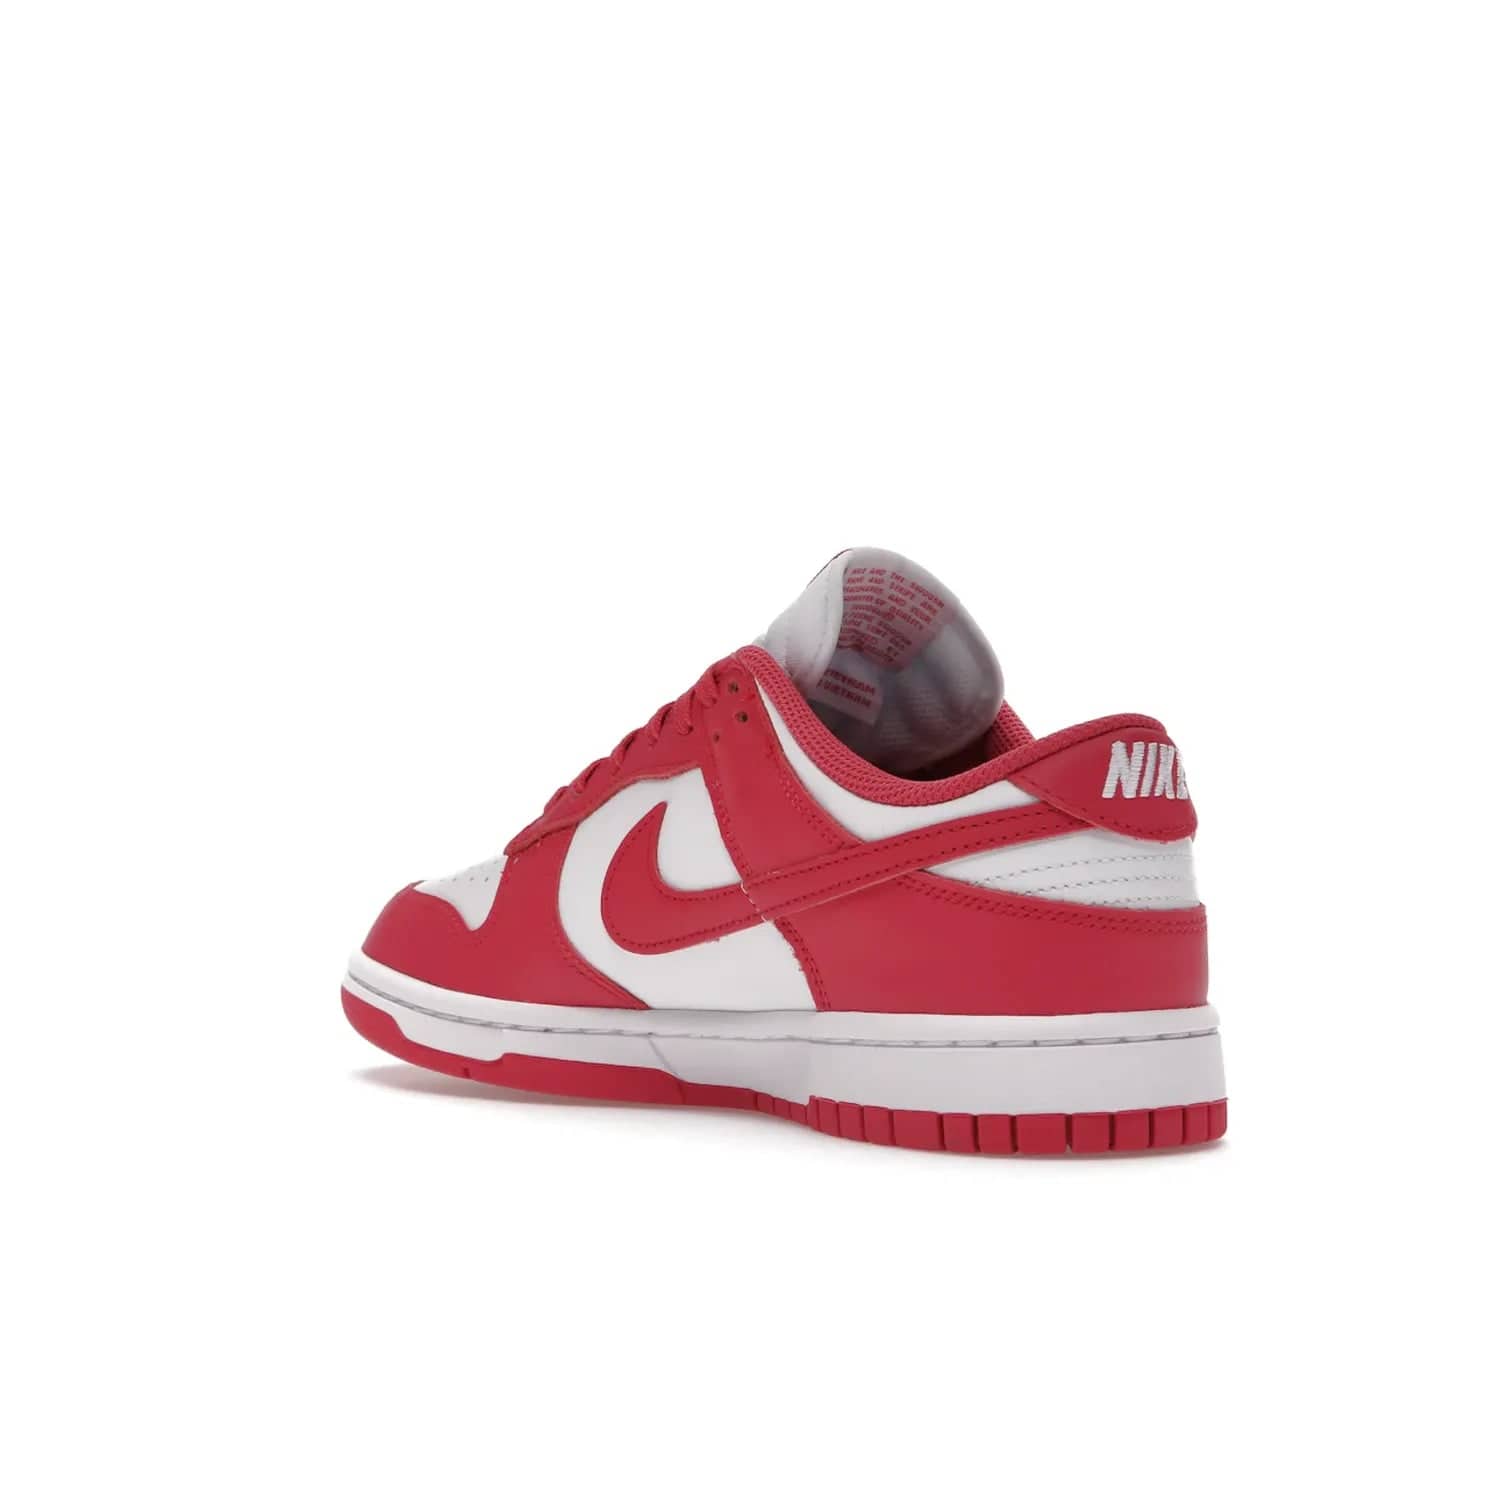 Nike Dunk Low Archeo Pink (Women's) - Image 24 - Only at www.BallersClubKickz.com - Introducing the stylish and comfortable Nike Dunk Low Archeo Pink (Women's). White/Archeo Pink colorway with white leather upper, pink overlays and Swooshes. Get yours now!